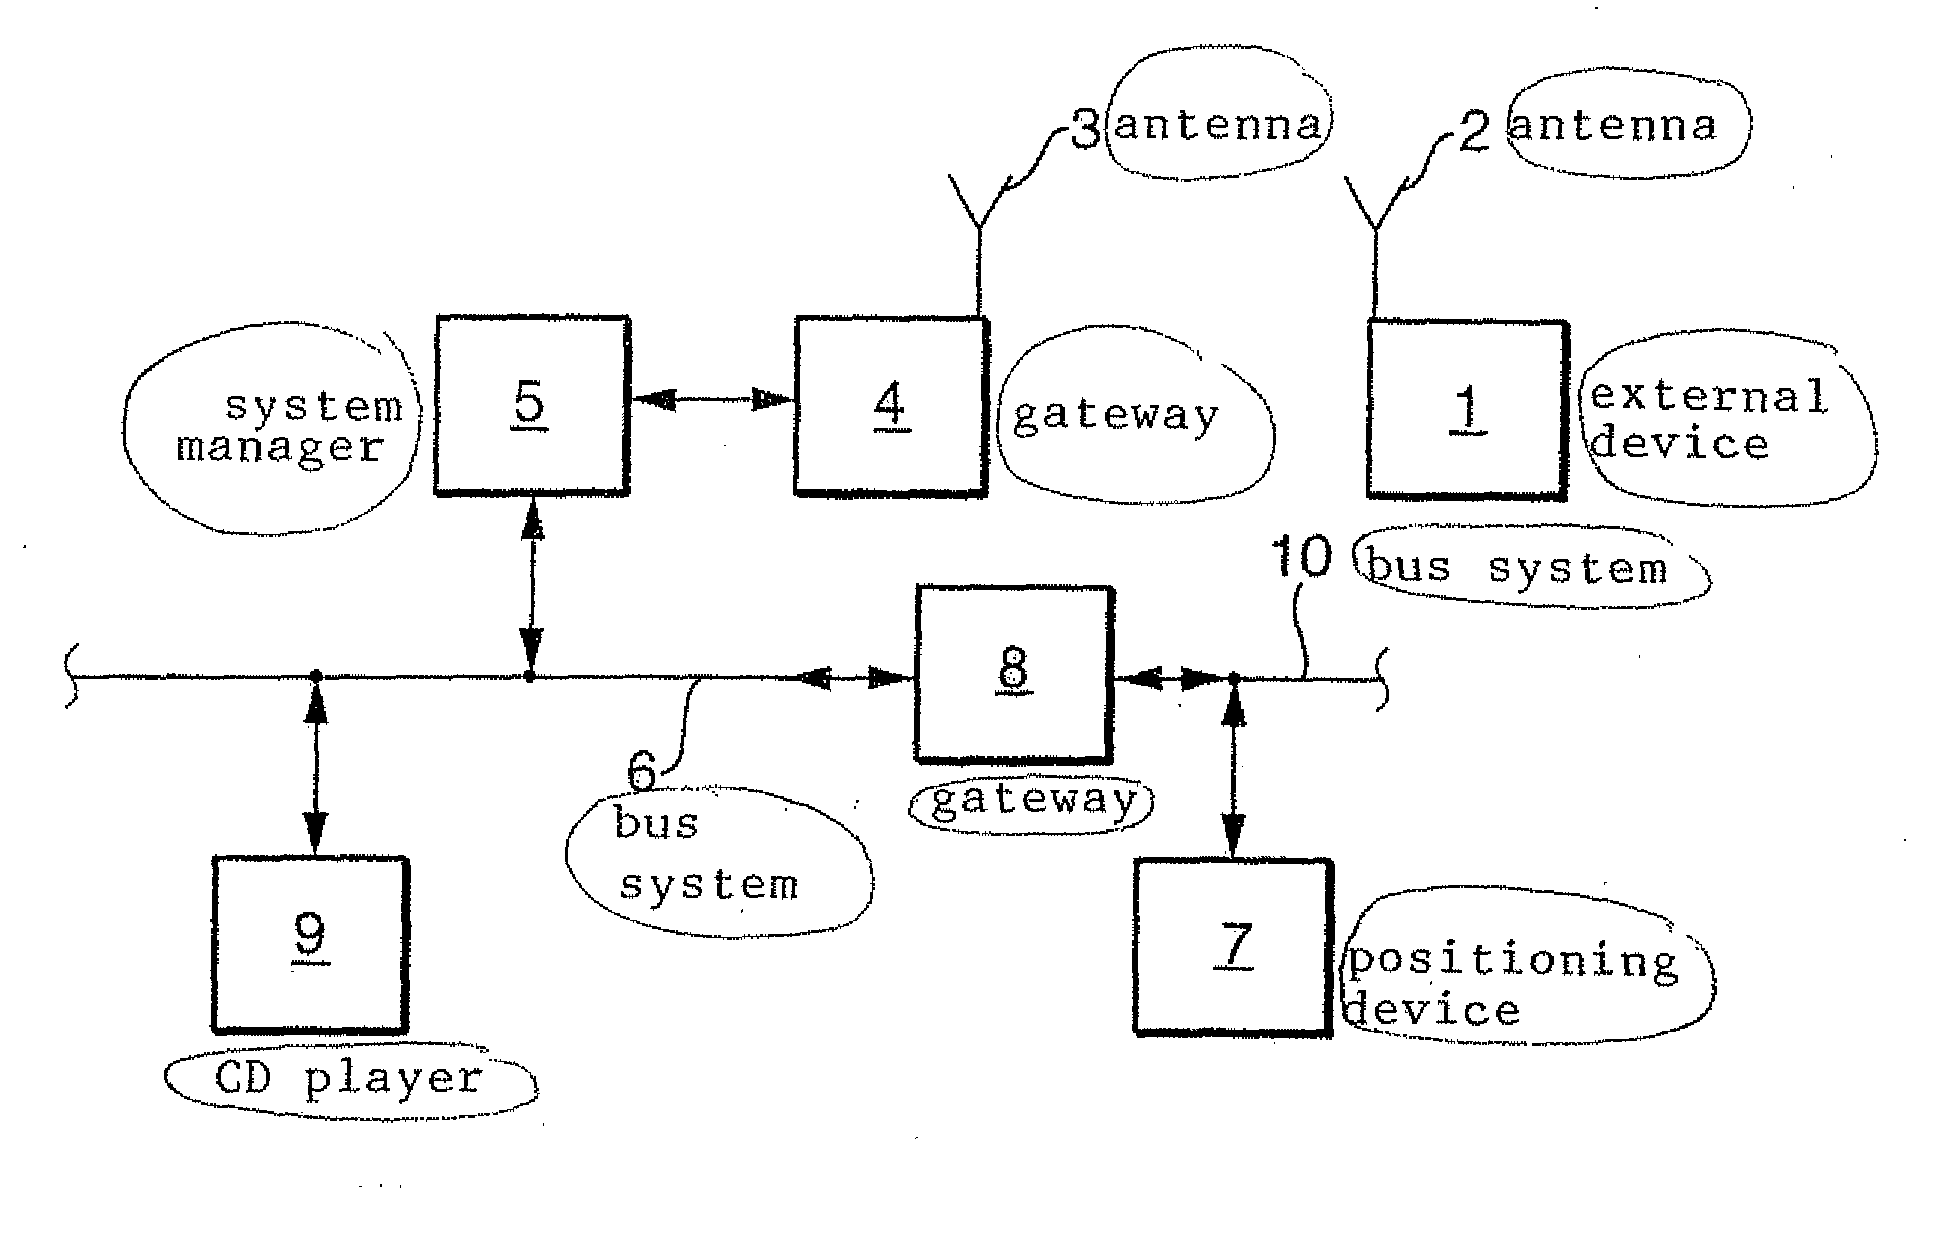 Method of accessing a device in a communication network in a motor vehicle via an external device and gateway